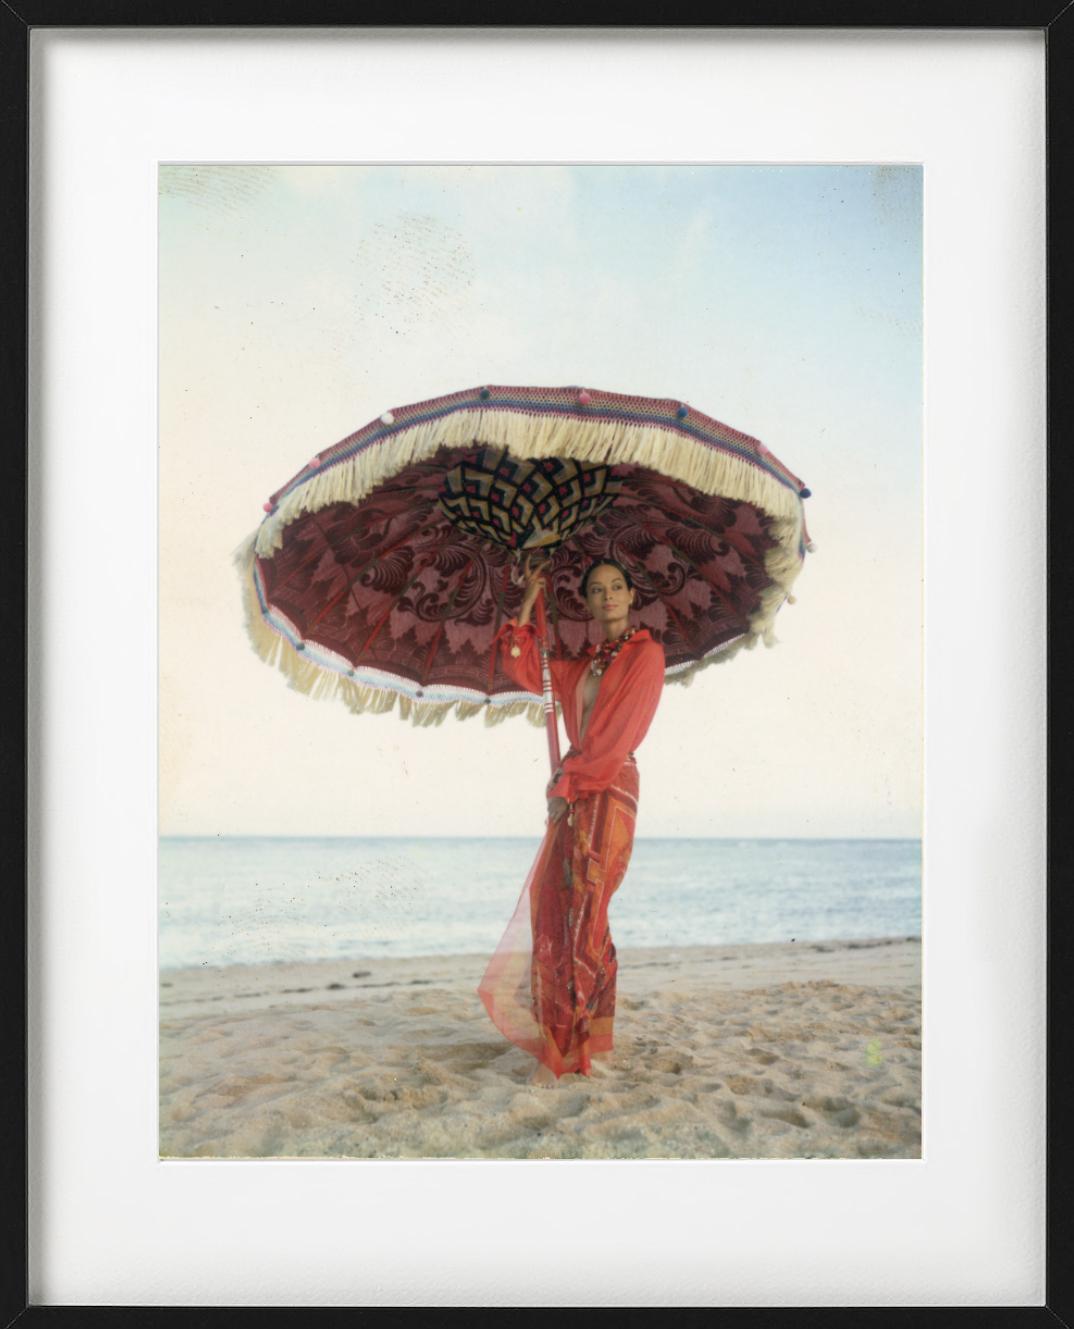 'Leticia H., Bali' - in red under a red parasol, fine art photography, 1993 - Photograph by Bruno Bisang